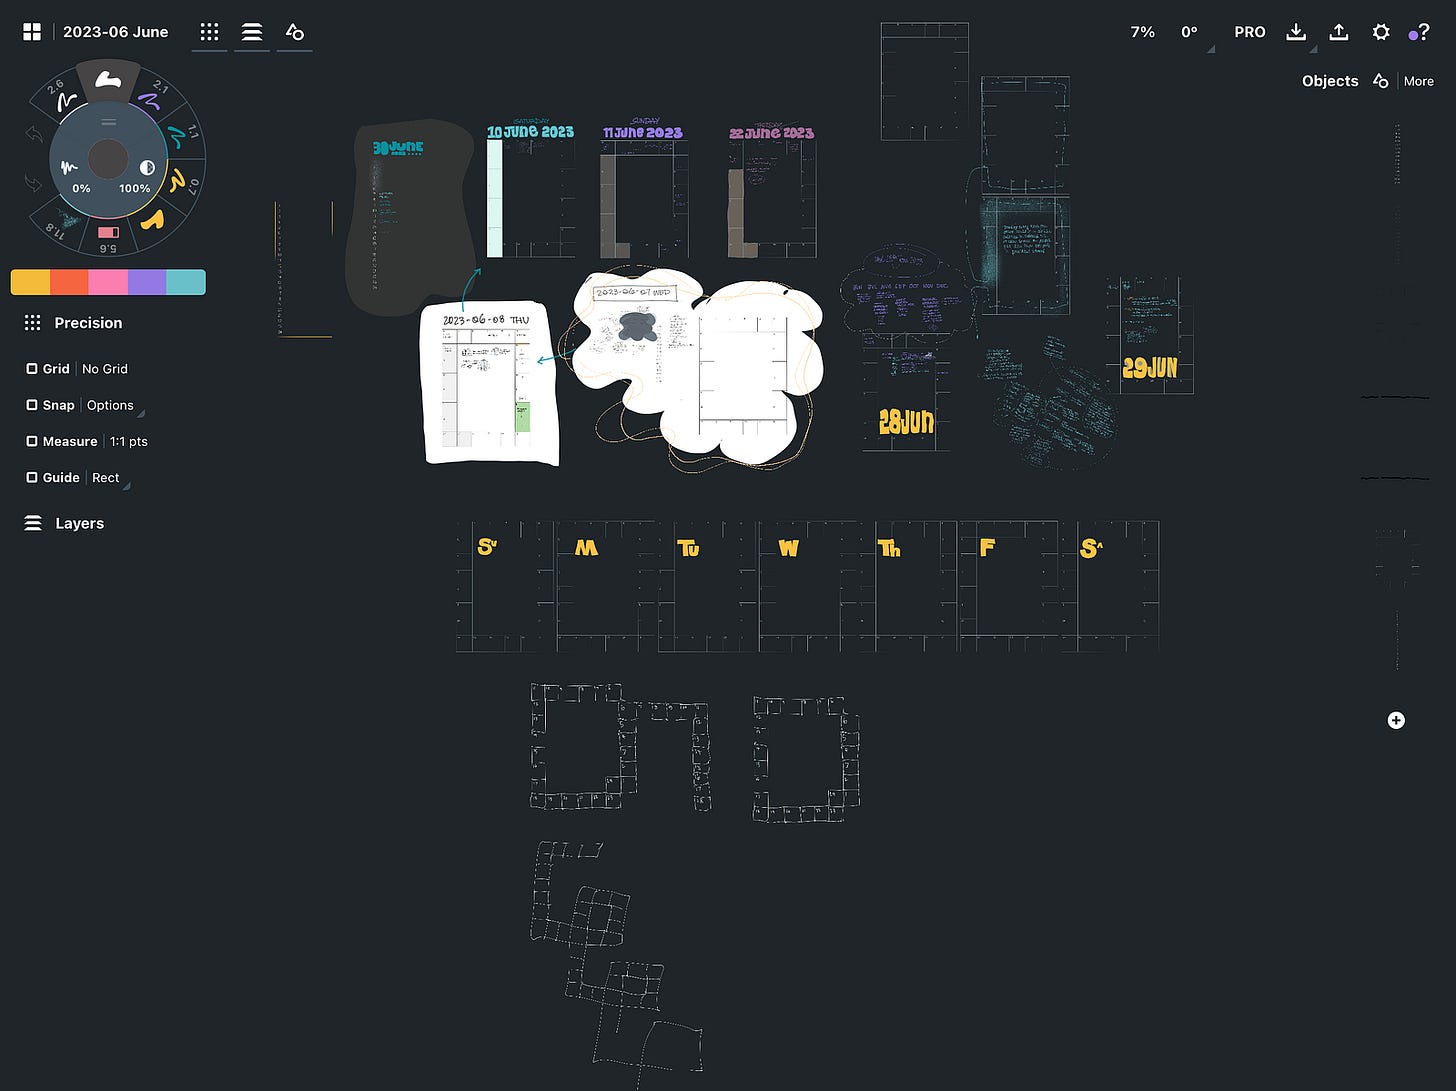 Screenshot of the Concepts app, showing a zoomed out view of handwriting and various grids and shapes on a dark background